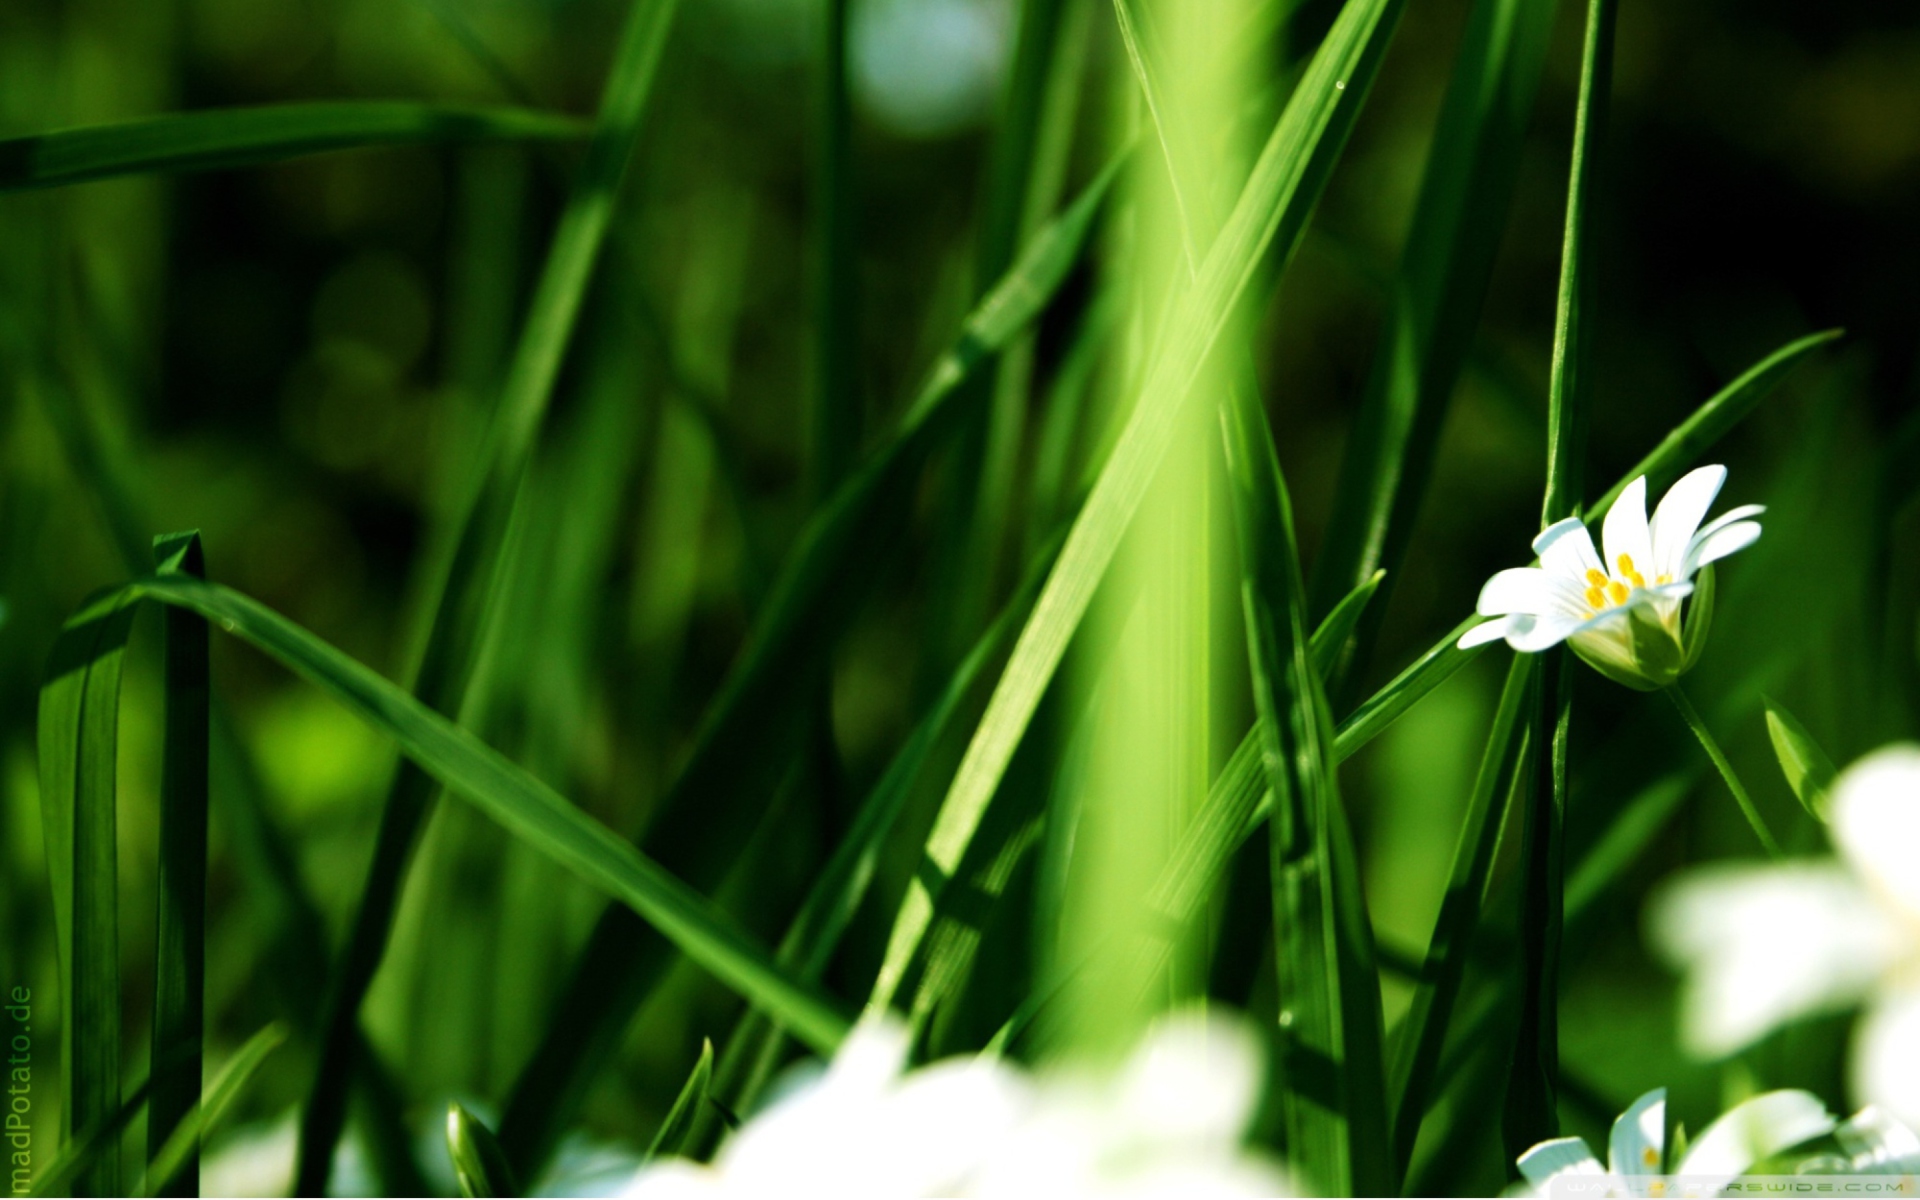 Grass And White Flowers wallpaper 1920x1200